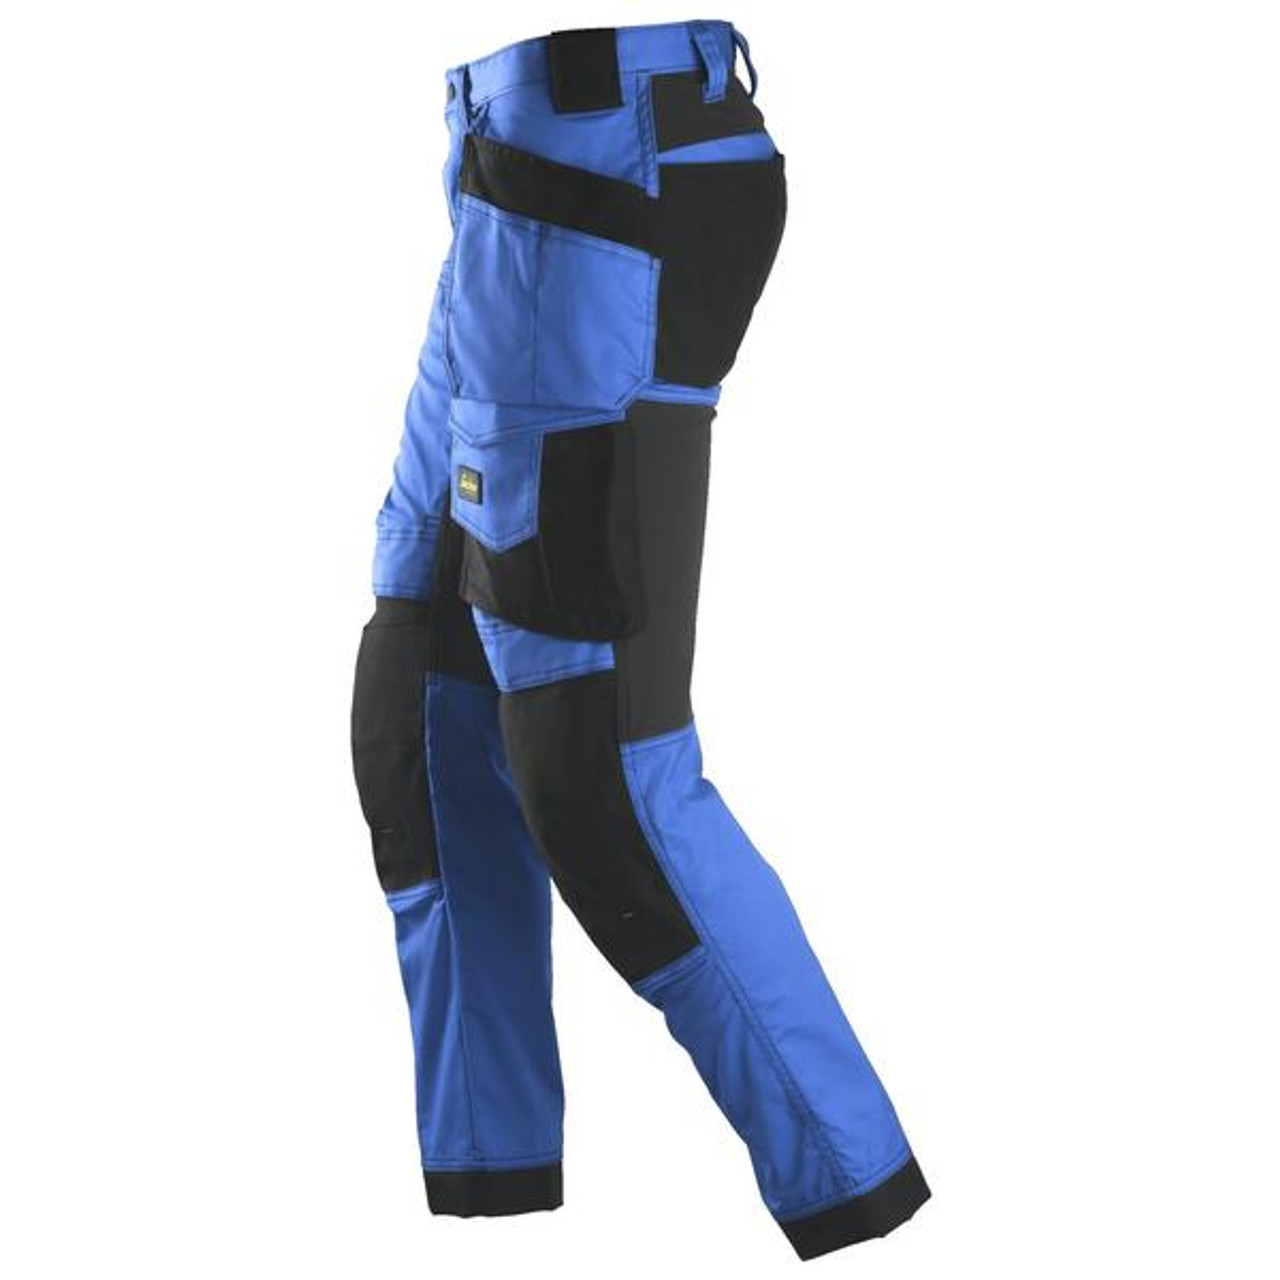 Buy online in Australia and New Zealand SNICKERS Cotton with Stretch Blue Trousers for Plumber that have Holster Pockets